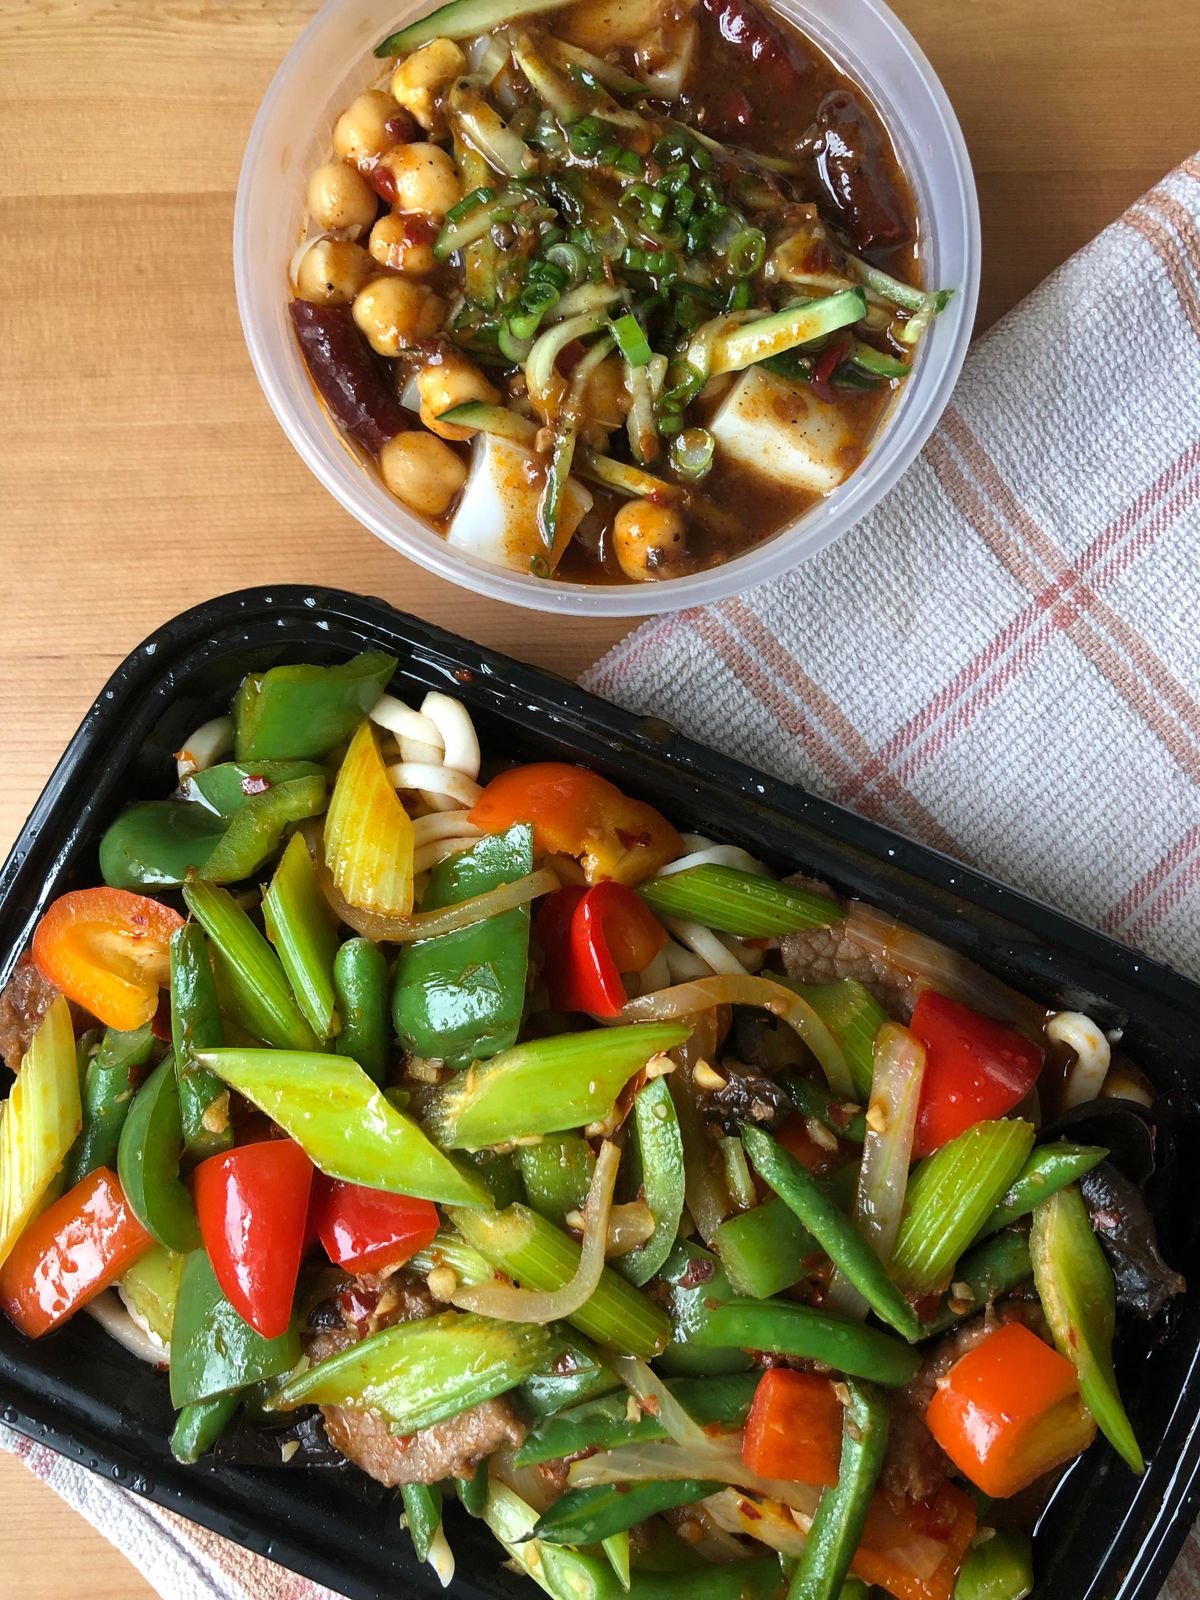 Two takeout containers, one filled with bean jelly and the other noodles and veggies including green and red peppers.